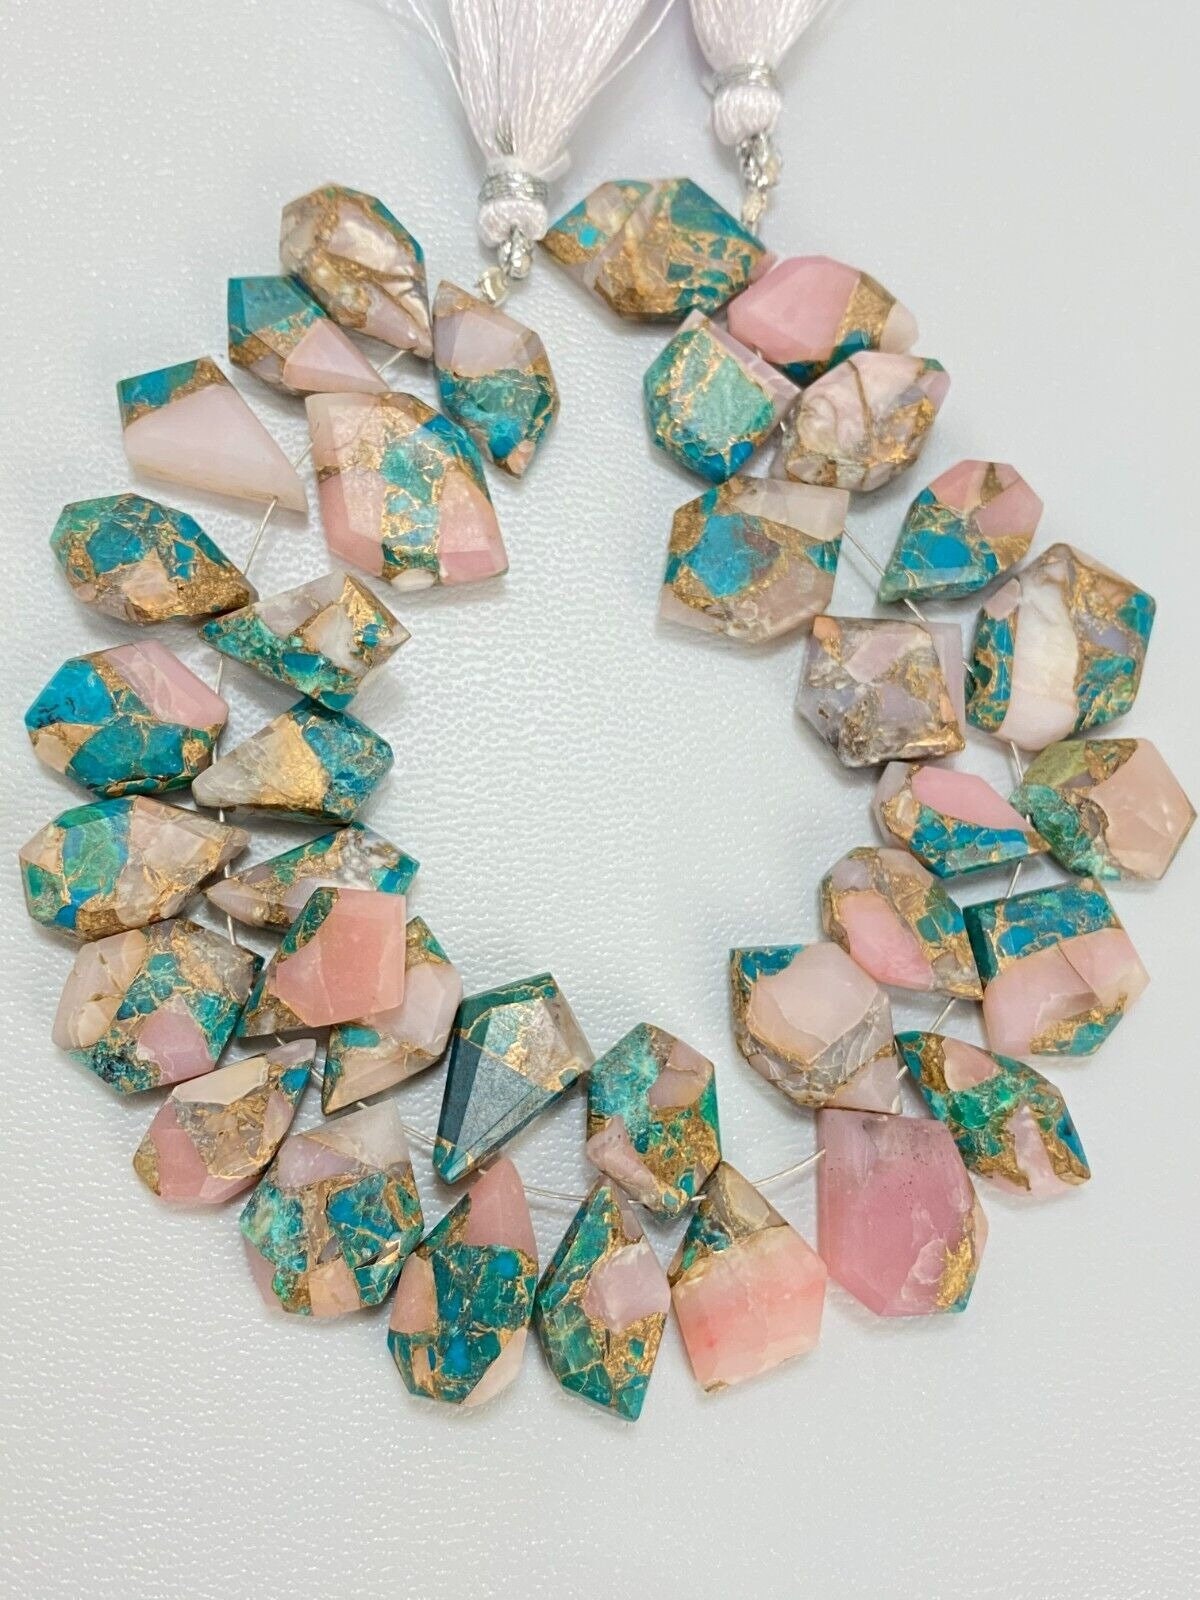 13 inches, 20-30mm, Peruvian Opal Faceted Marquise Briolette Loose Gemstone  Beads, Opal Beads